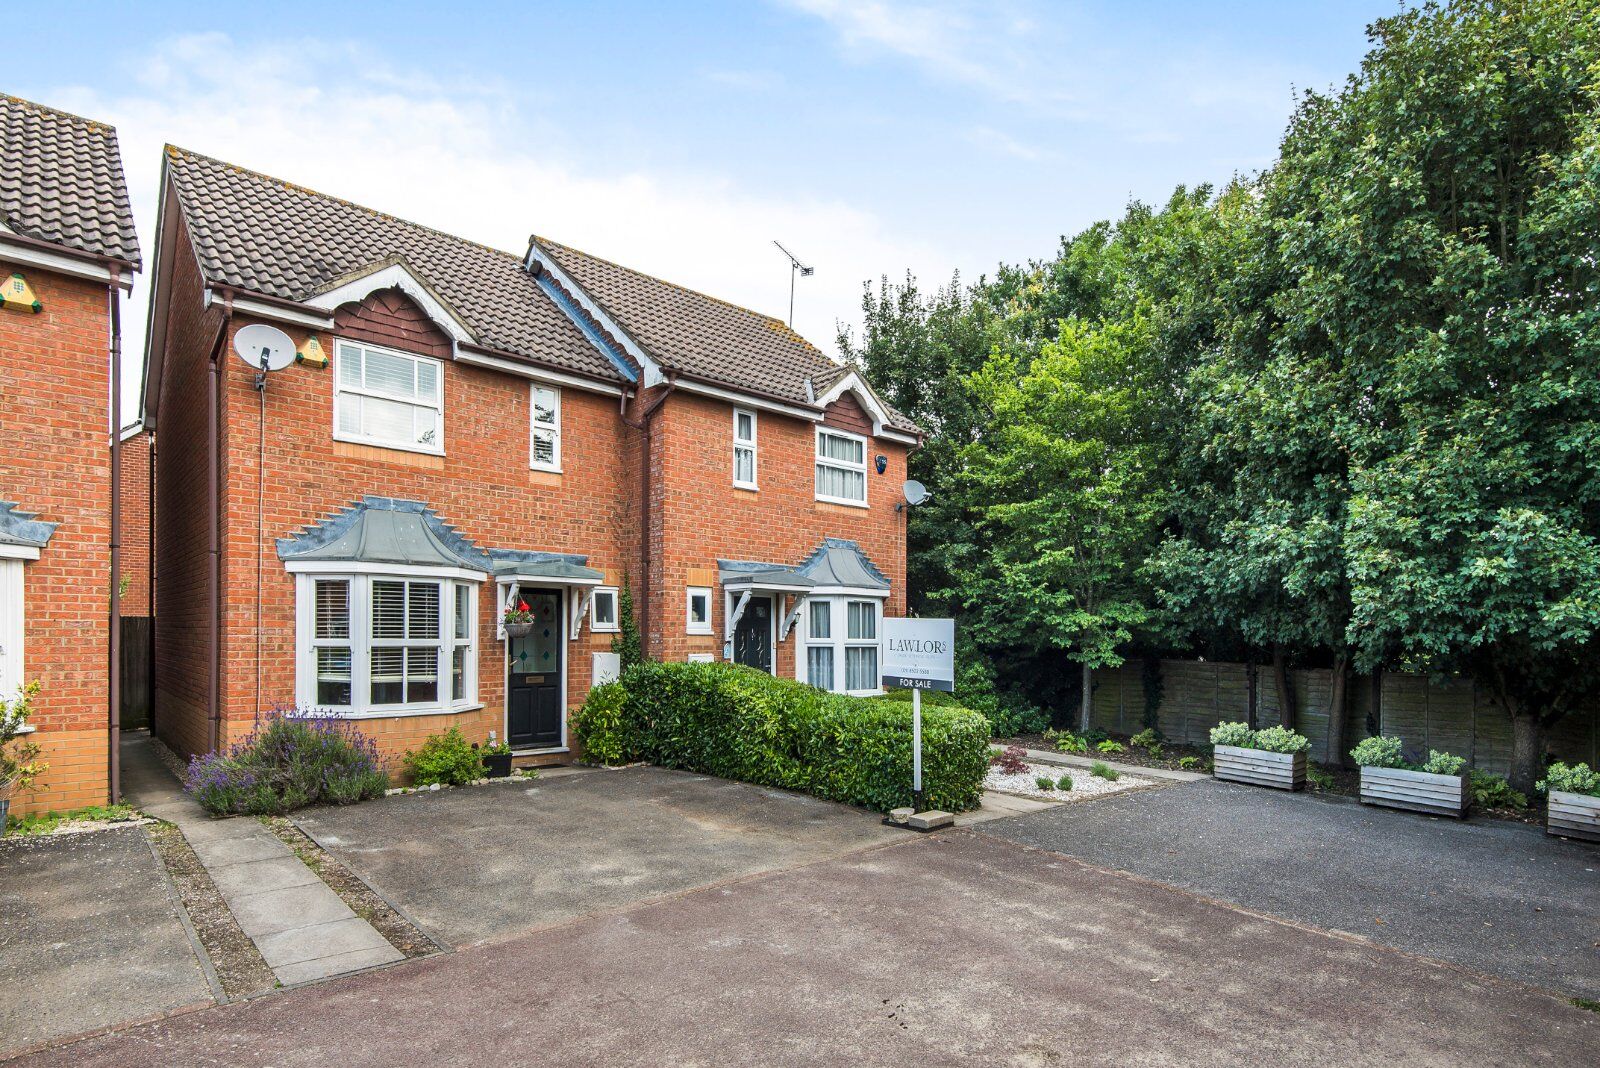 2 bedroom end terraced house for sale Howard Close, Loughton, IG10, main image